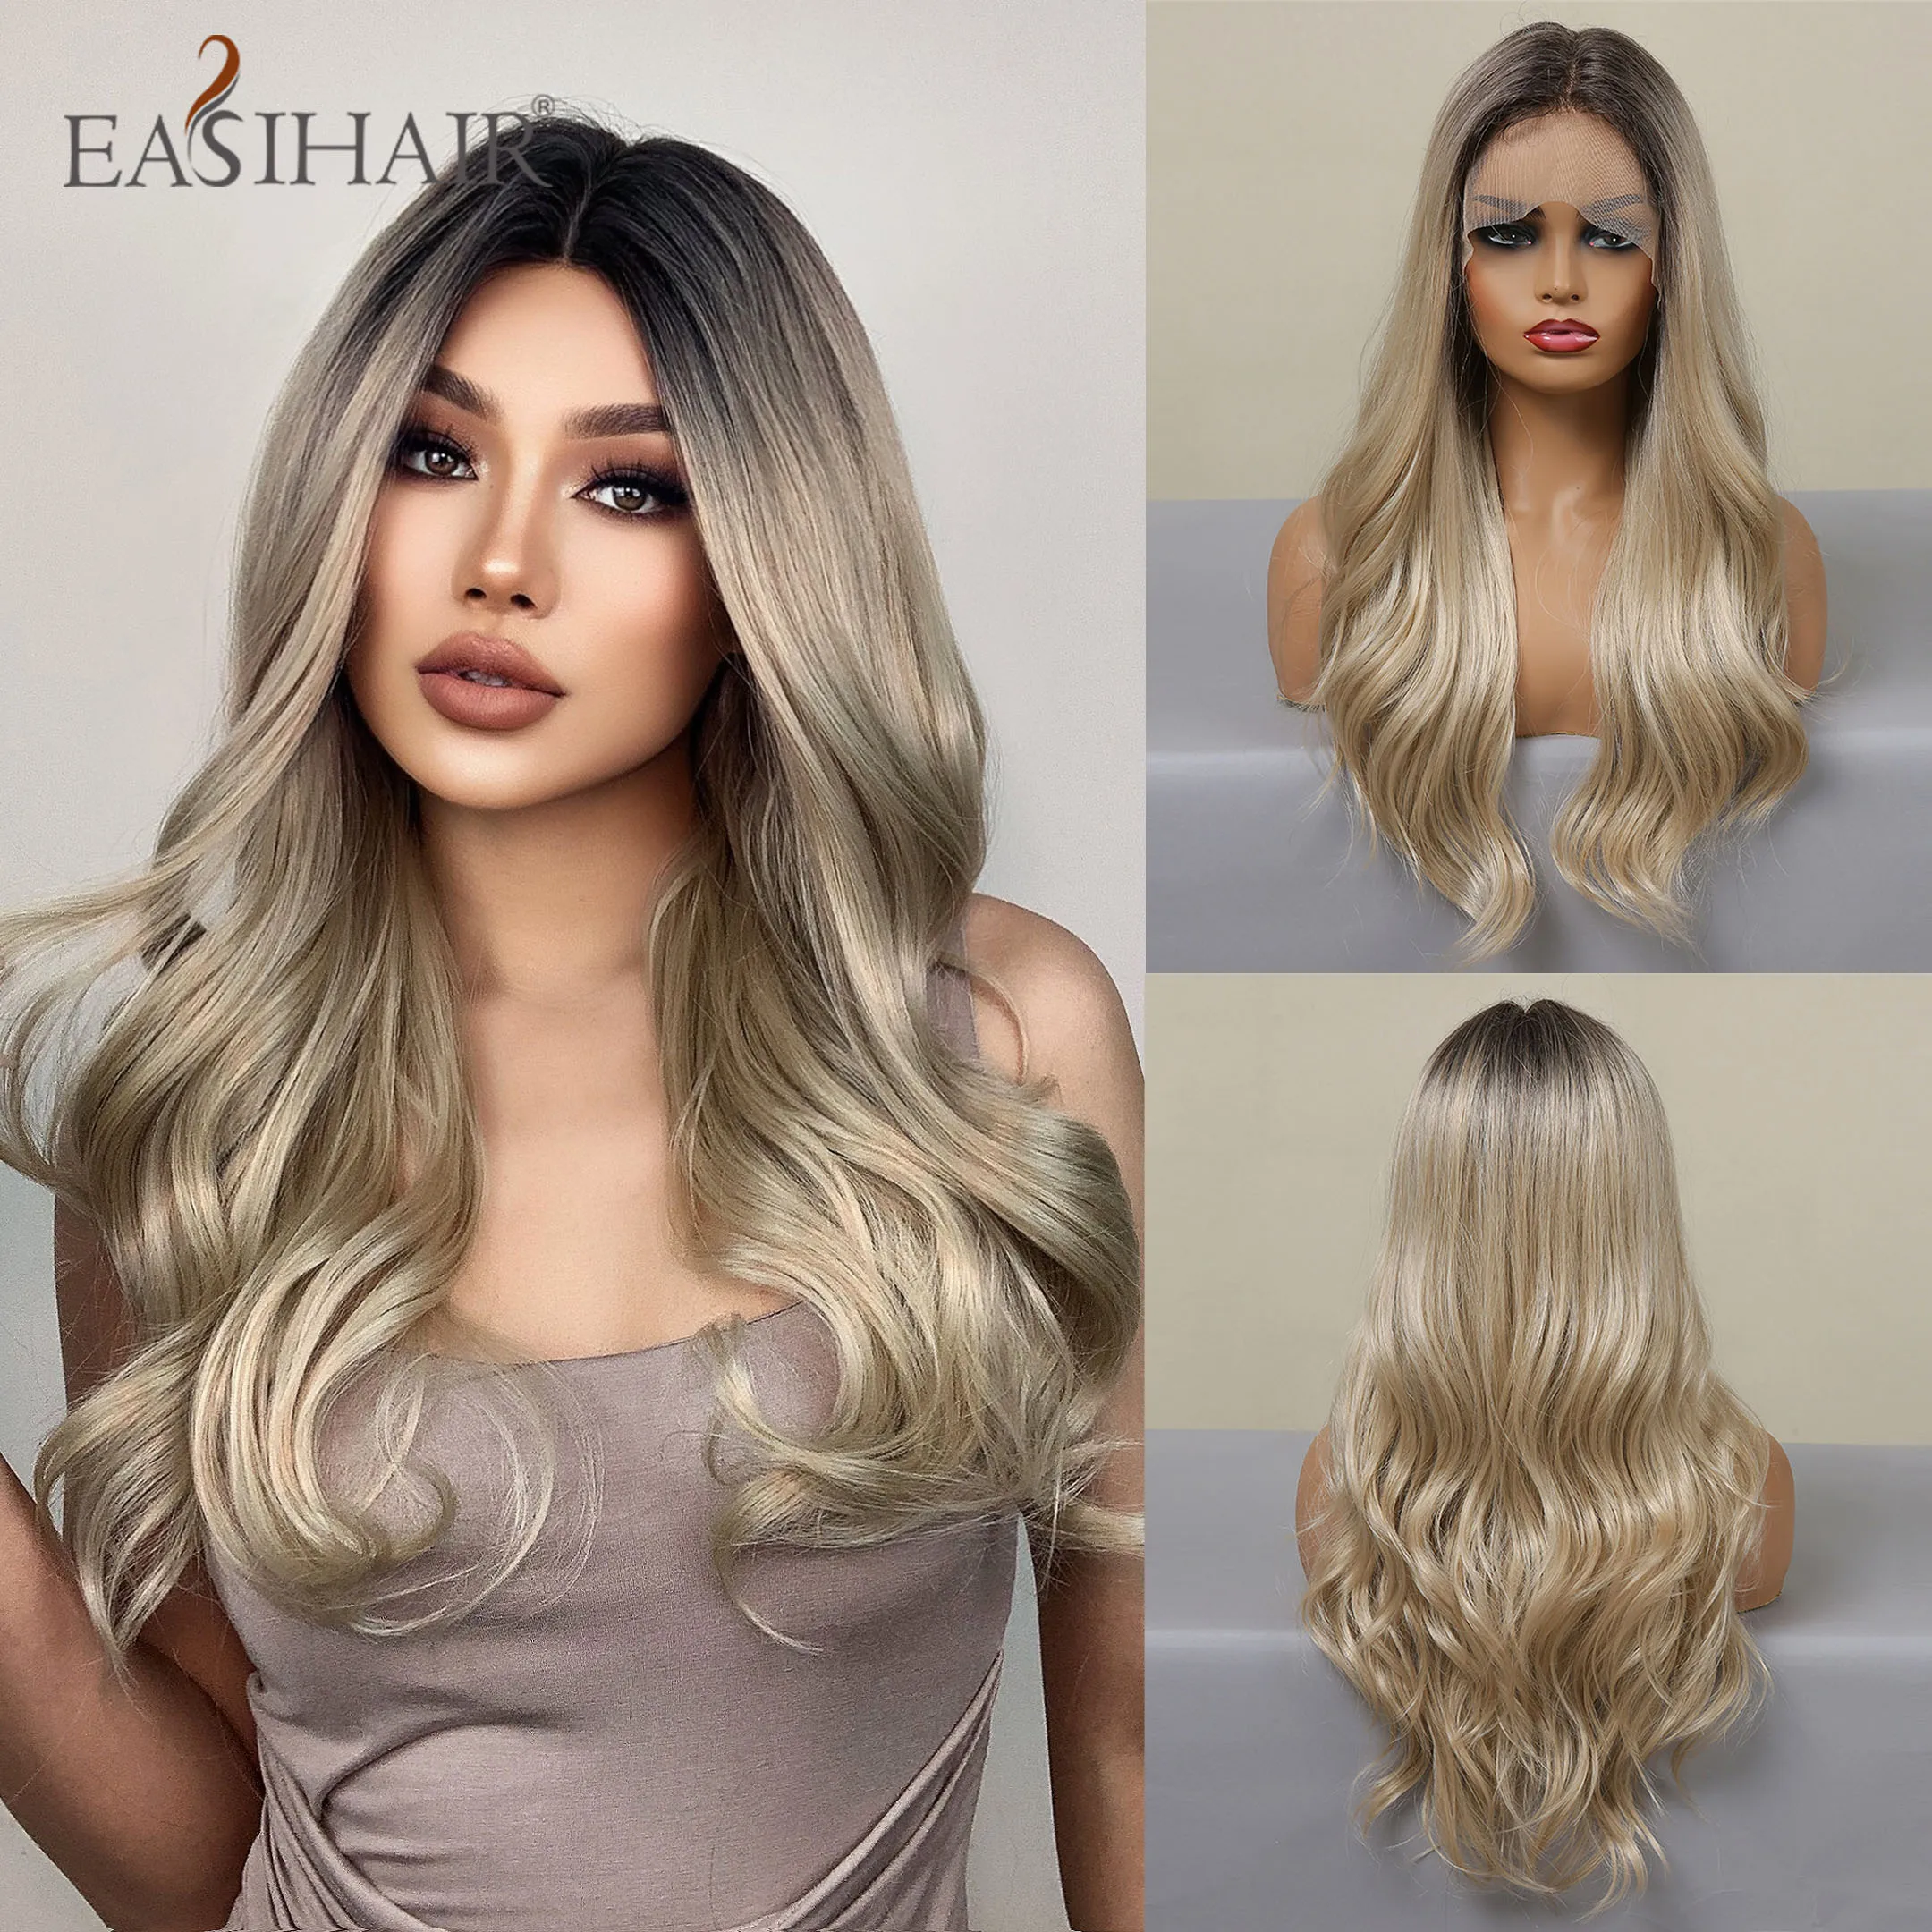 

EASIHAIR Long Wavy Blonde Ombre Lace Front Synthetic Wig Brown Root Lace Frontal Natural Wig for Women Cosplay Wig Hight Density